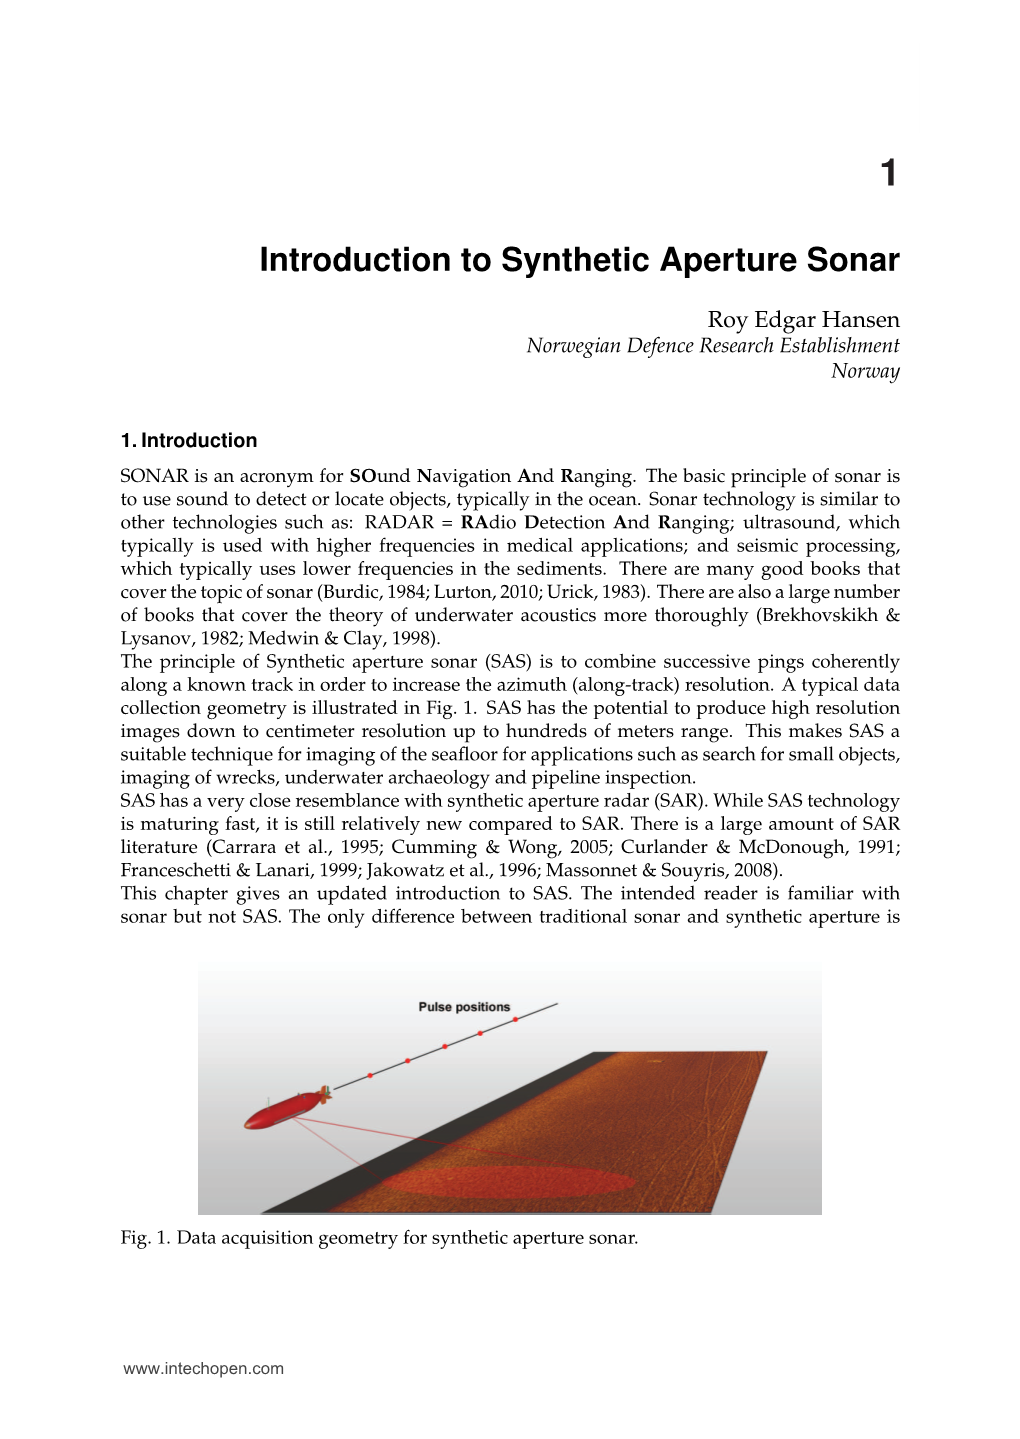 Introduction to Synthetic Aperture Sonar